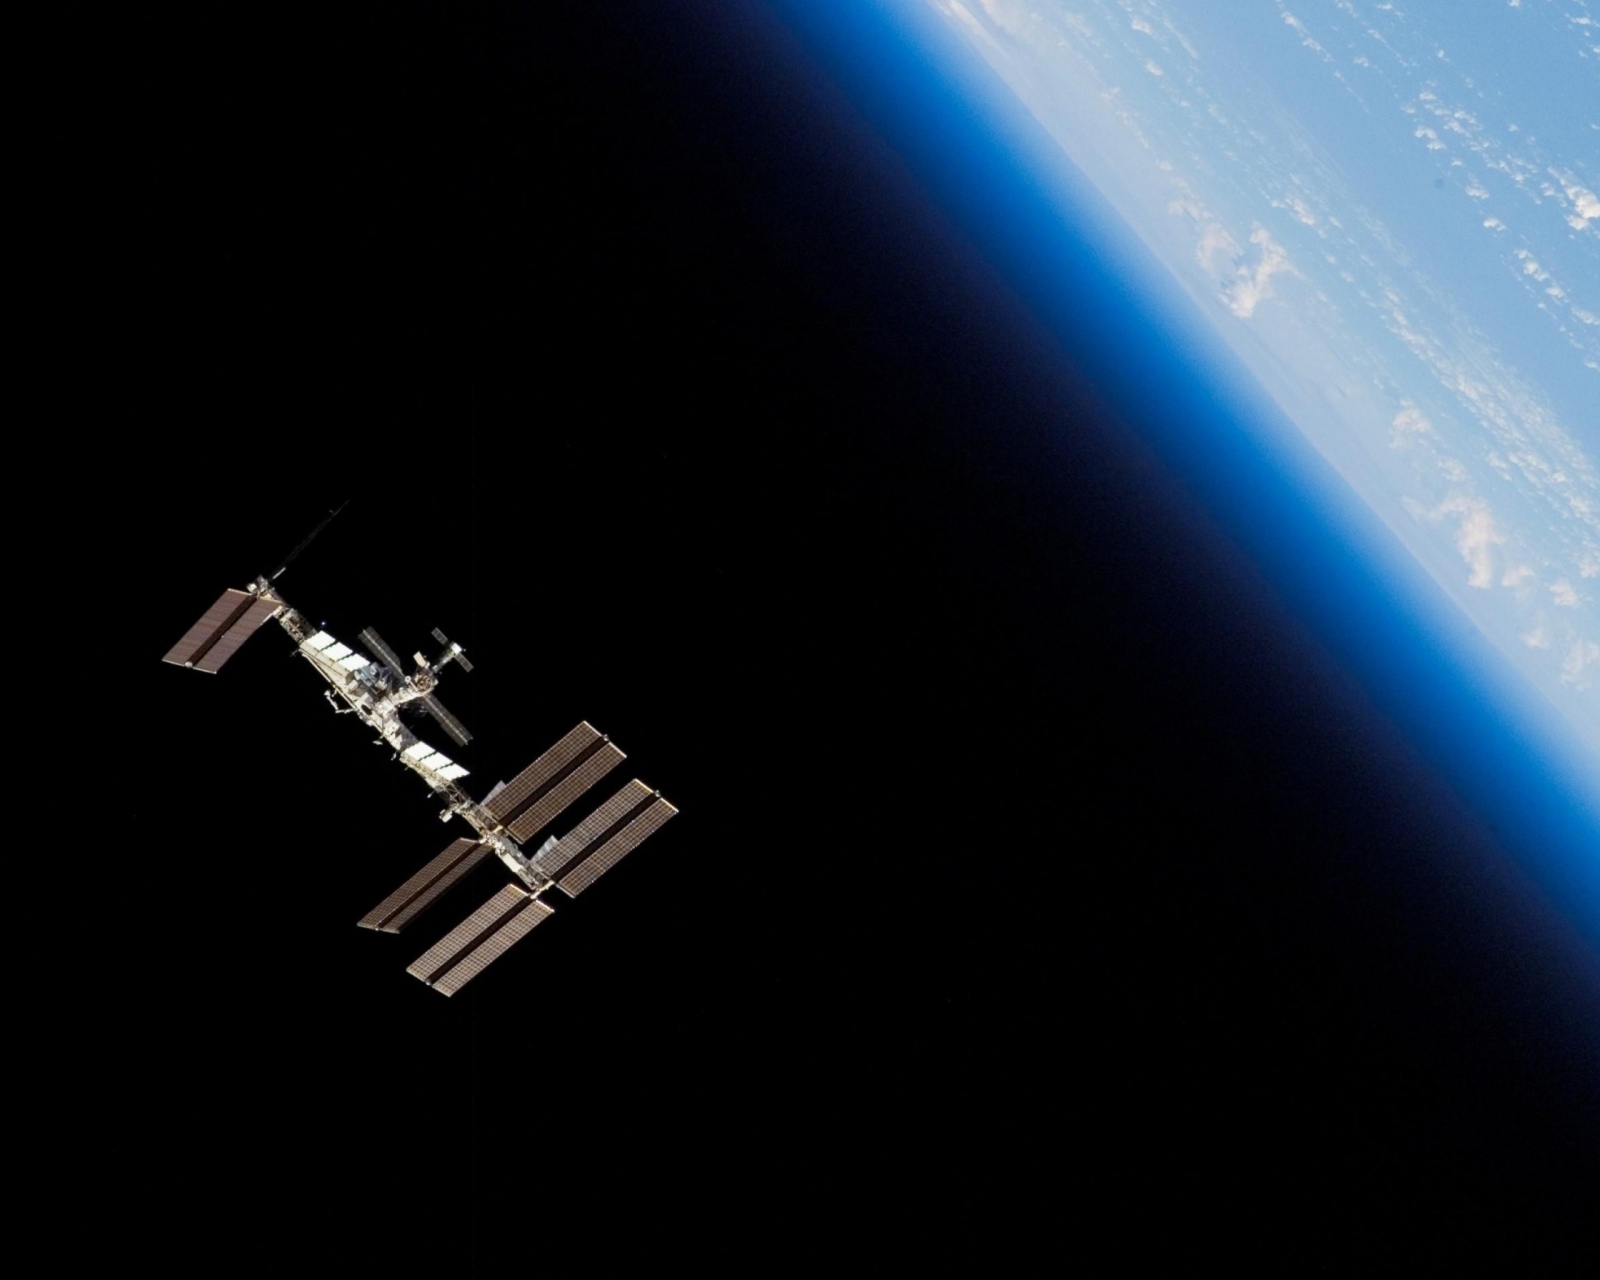 The ISS In Space screenshot #1 1600x1280